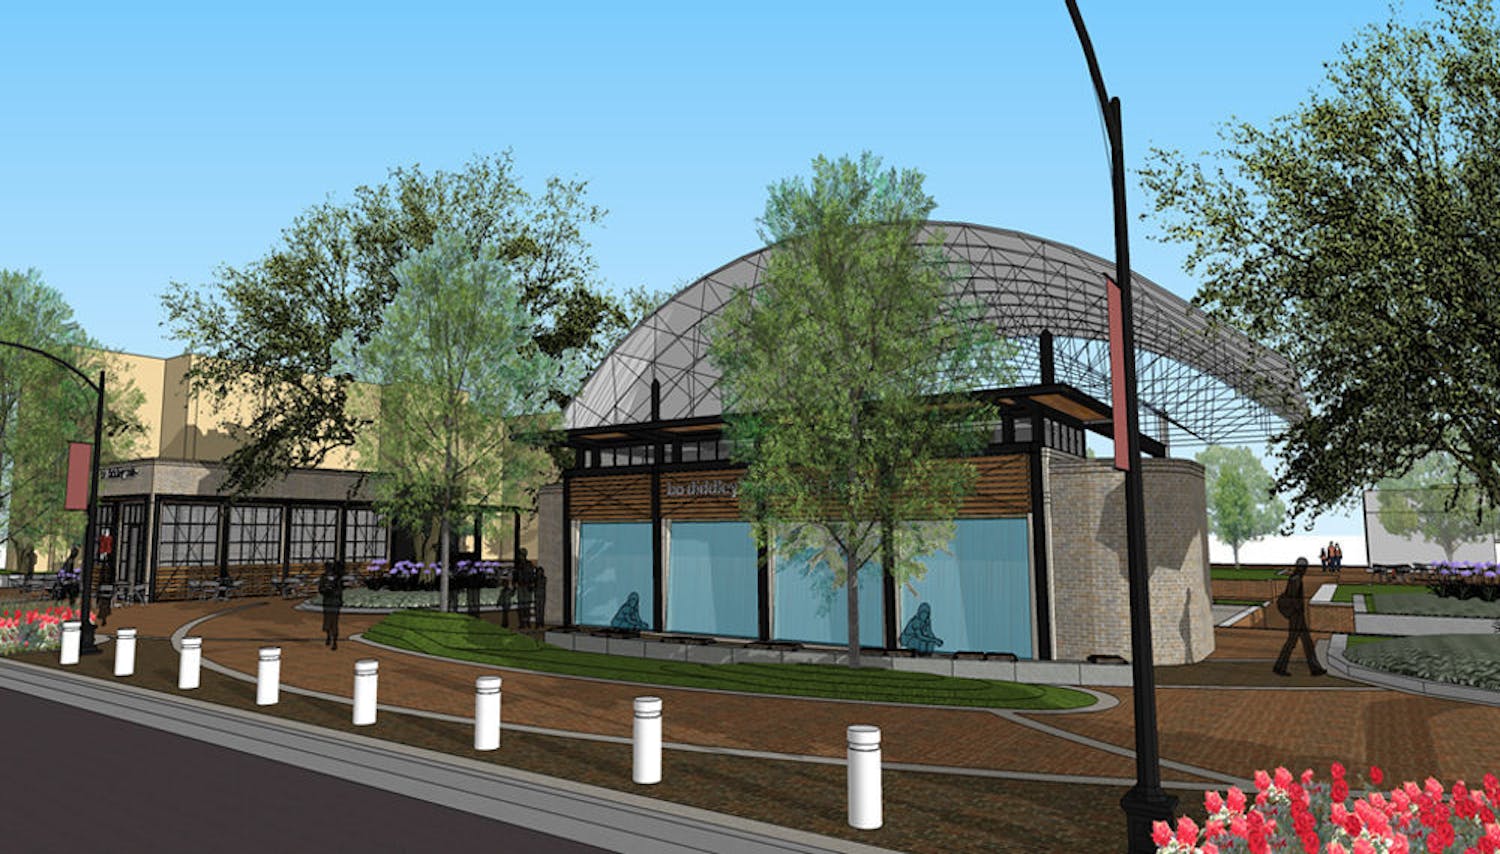 Above is a rendering of the Bo Diddley Community Plaza’s planned renovation, which will include a new cafe, information kiosk, green room and water wall feature. It will close for renovations in March.&nbsp;